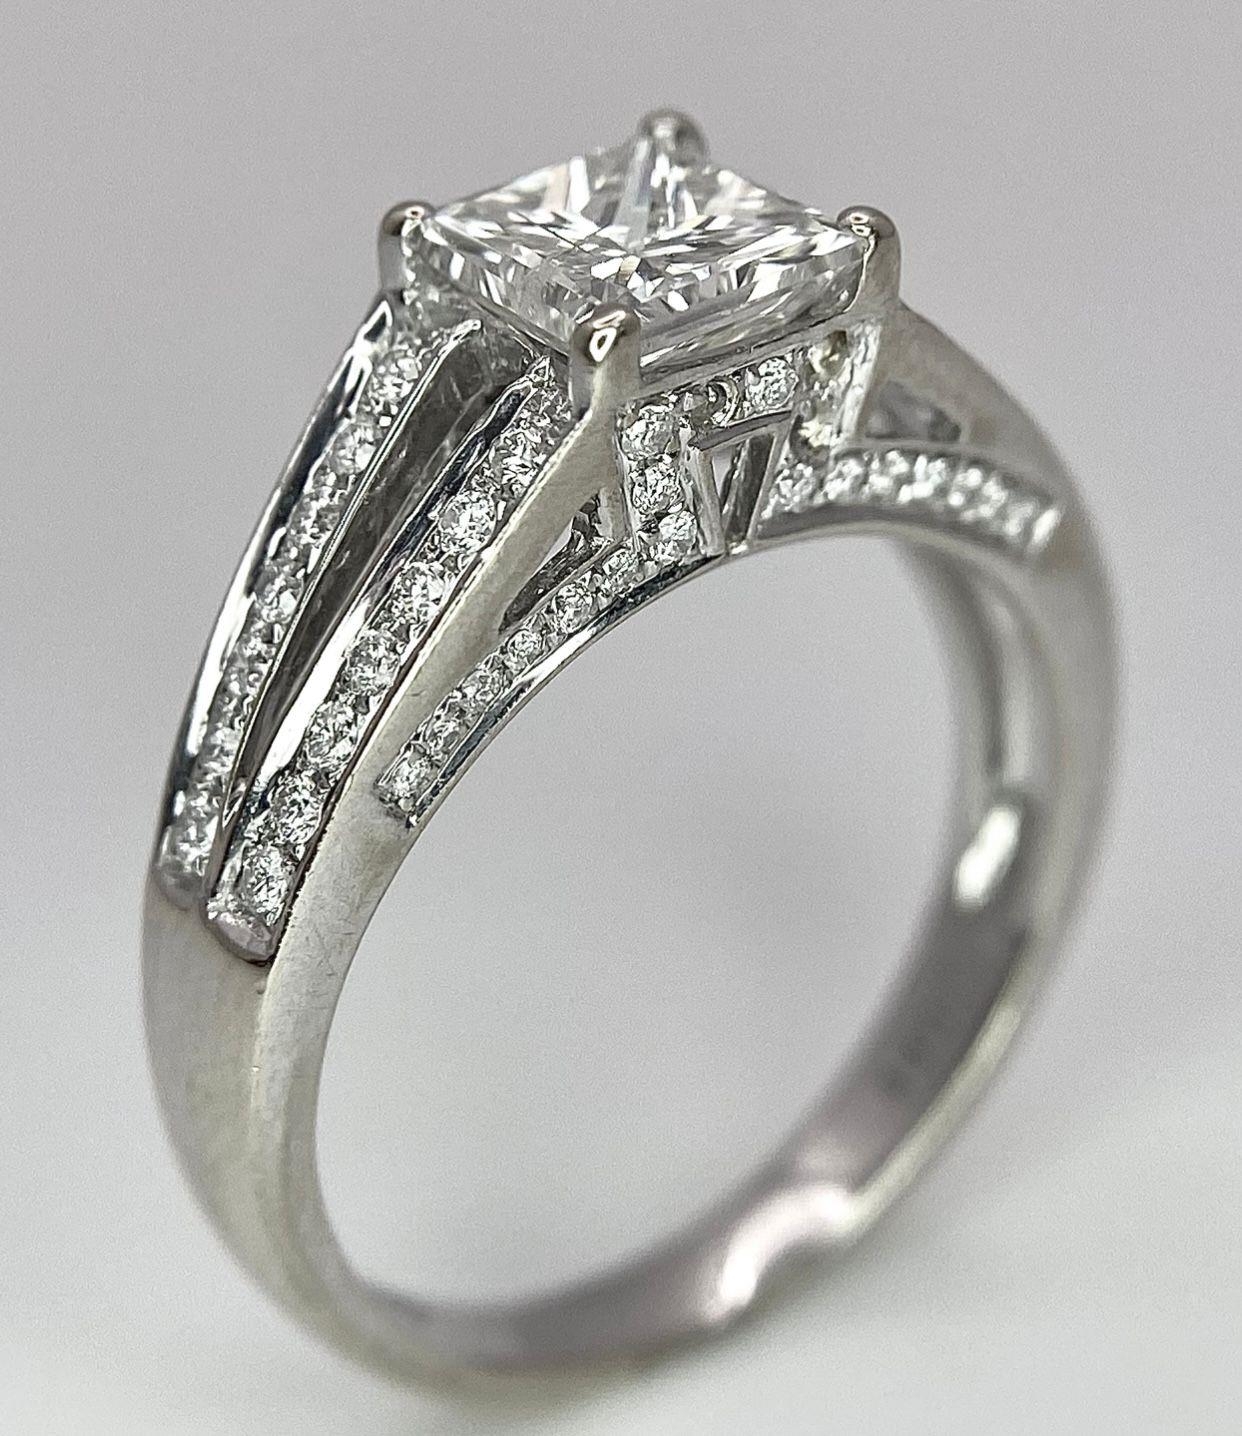 An 18K White Gold Diamond Ring. Central VS2 1ct Princess Cut Near White Diamond with Round Cut - Image 4 of 10